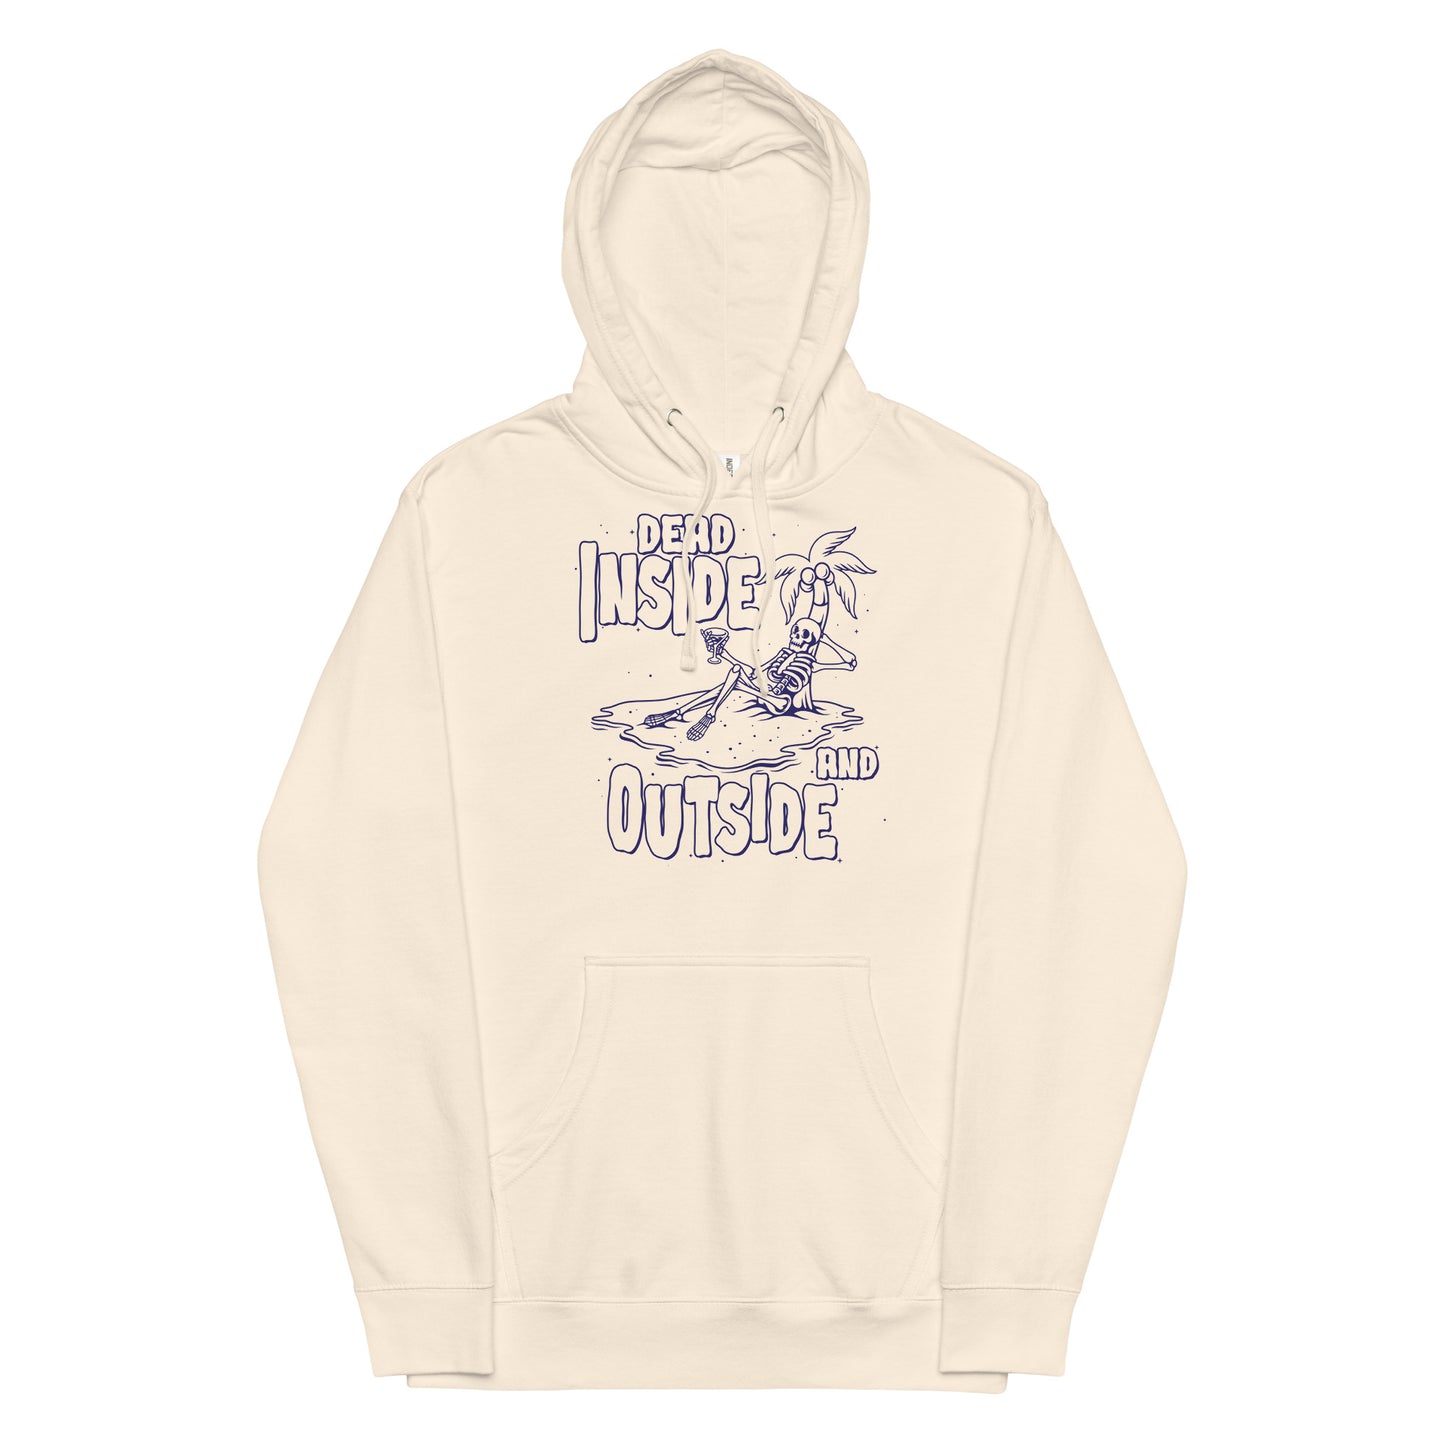 Dead Inside and Outside Unisex hoodie